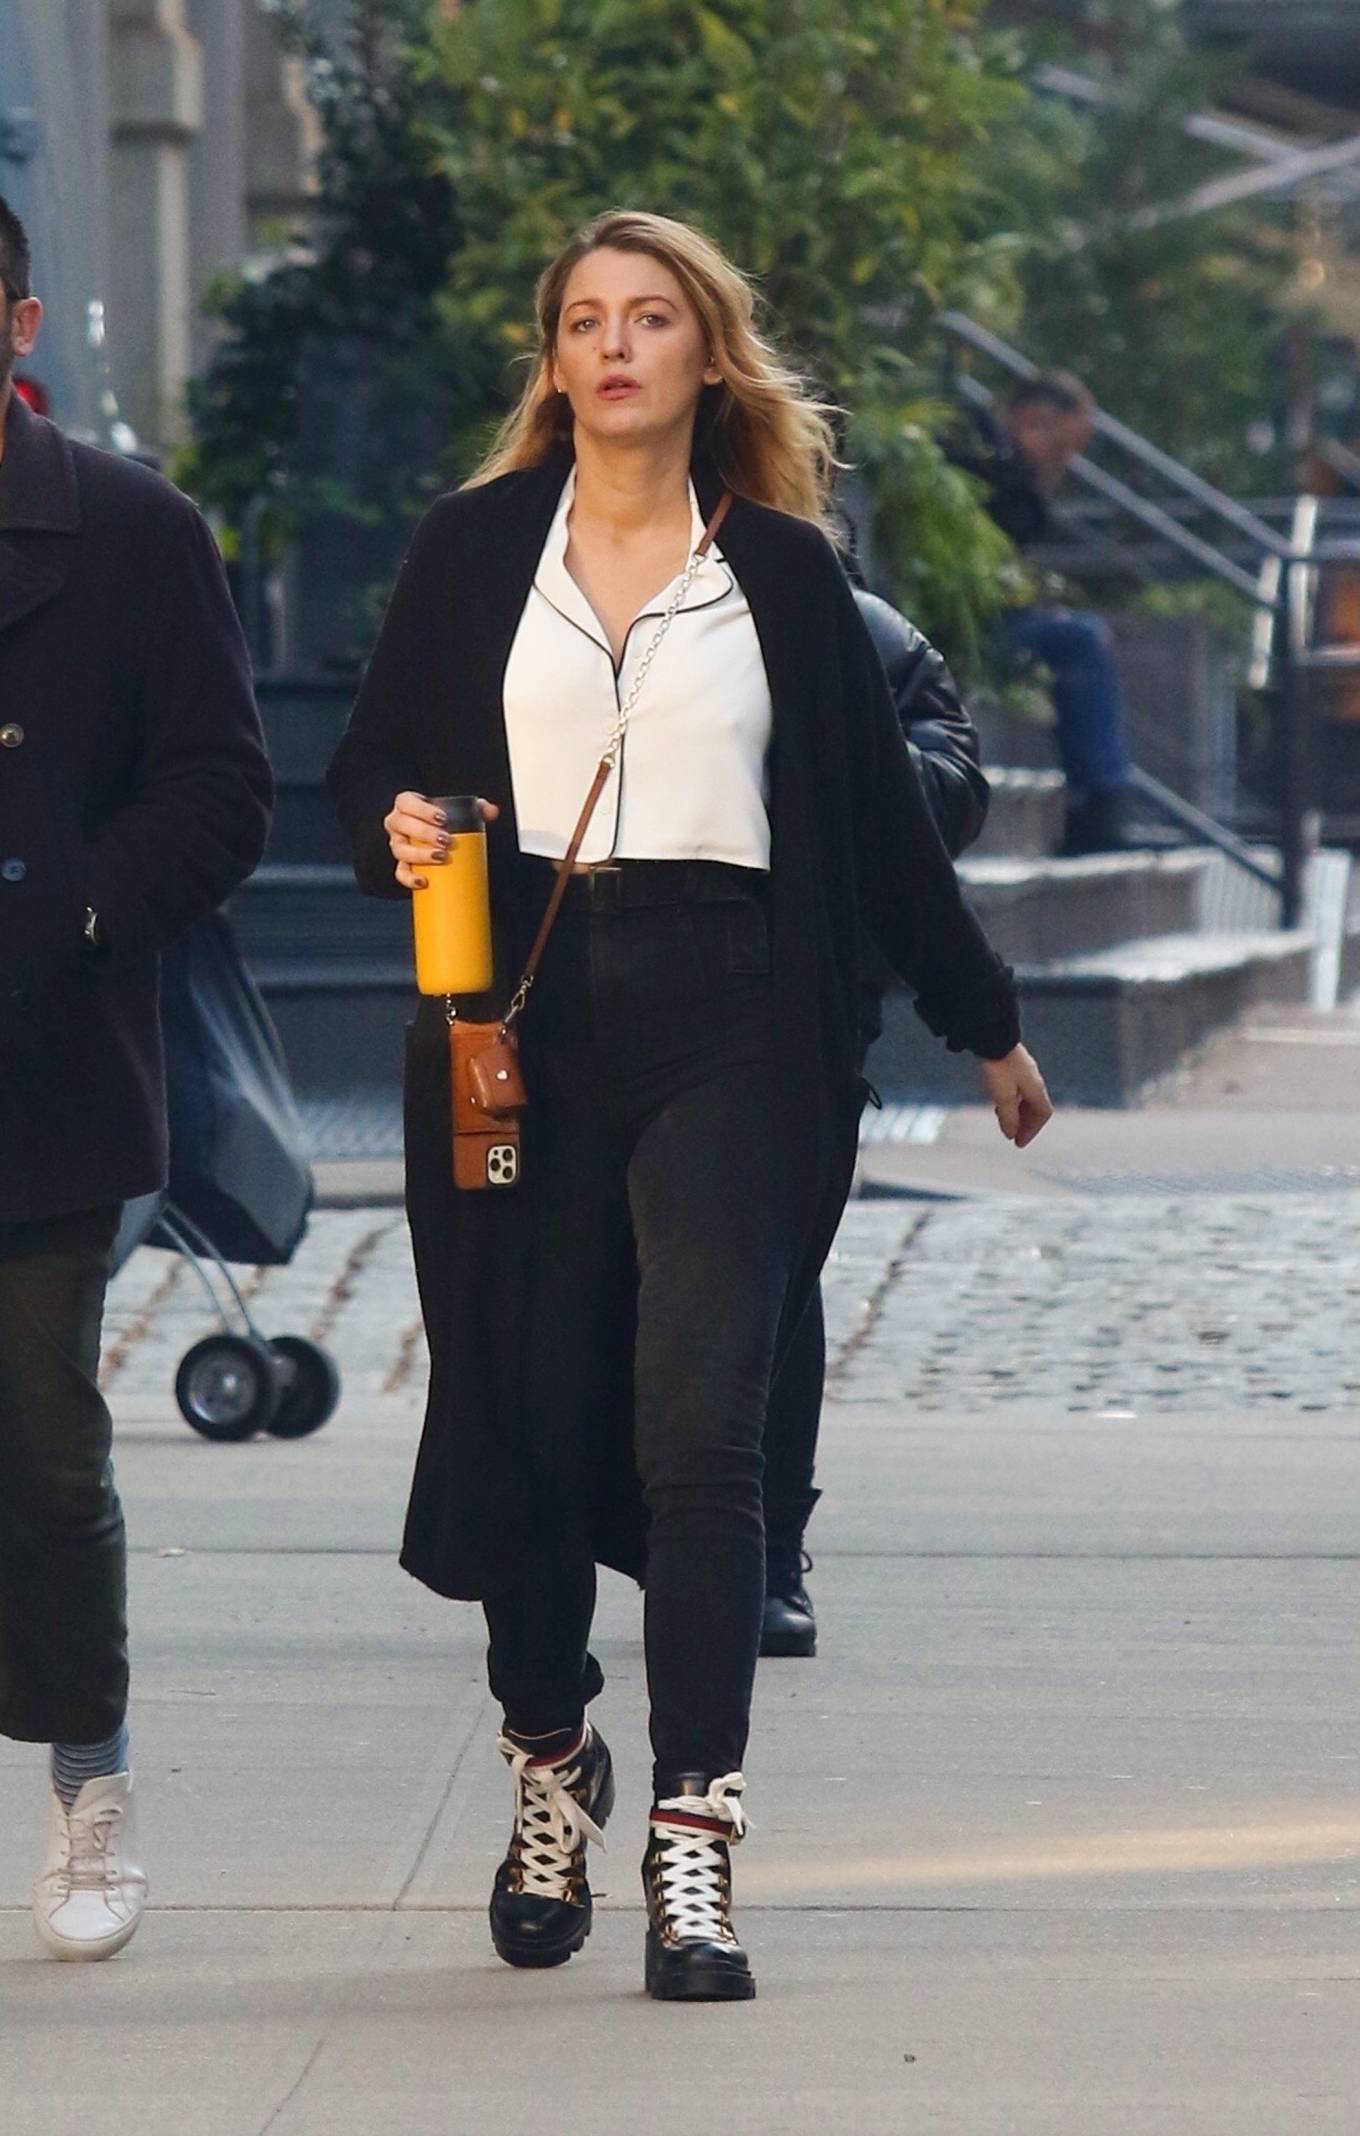 Blake Lively 2021 : Blake Lively – Out for a stroll in NYC-24